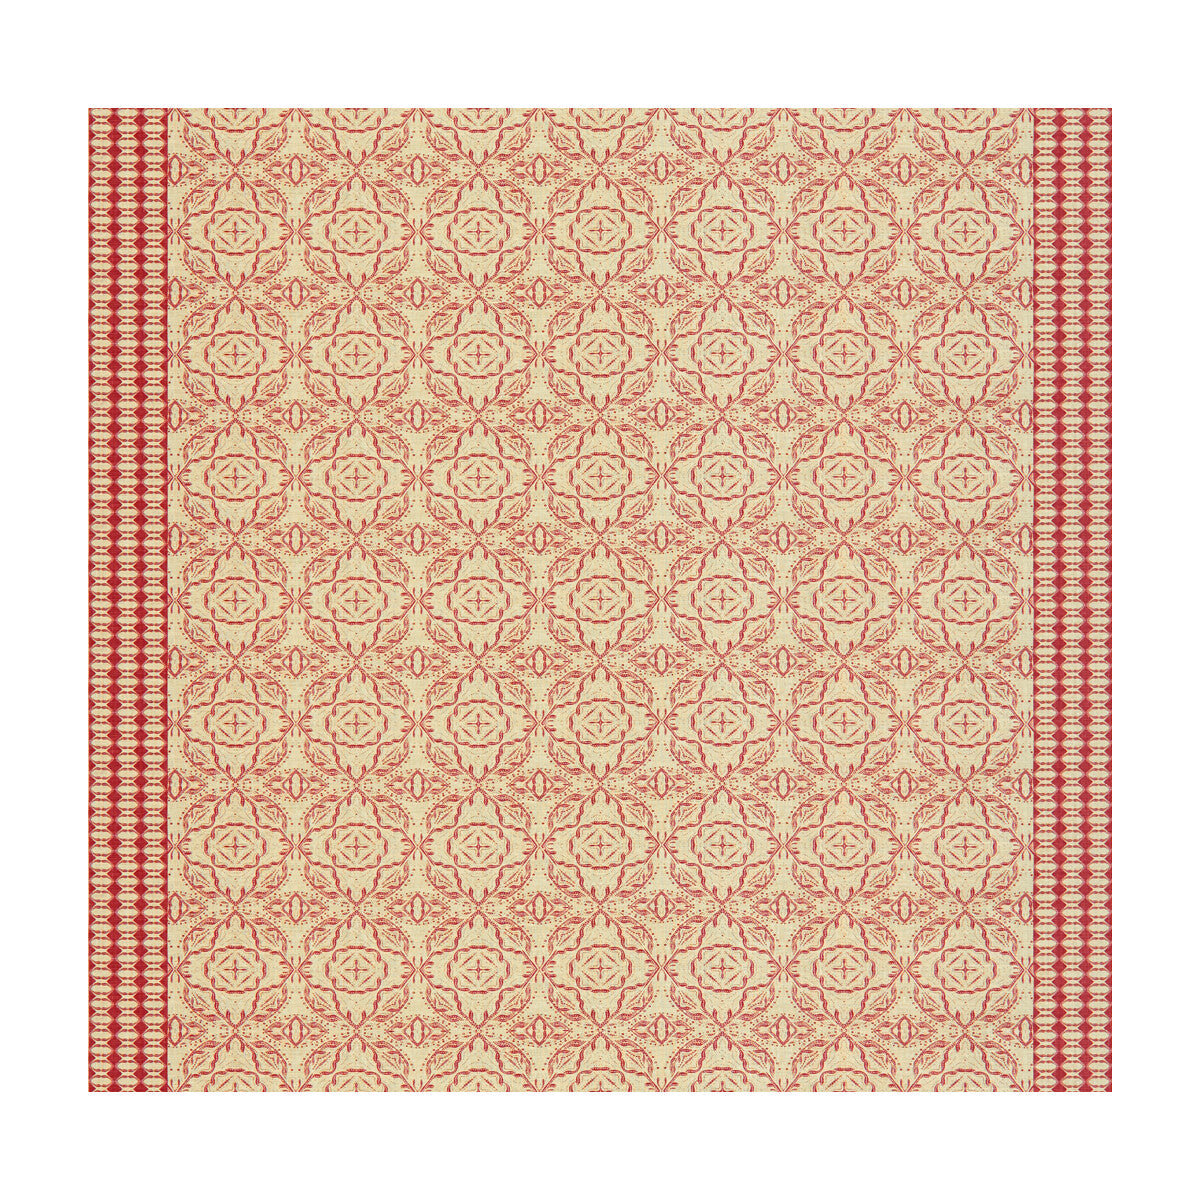 Maze fabric in cerise color - pattern GWF-3506.7.0 - by Lee Jofa Modern in the Allegra Hicks Garden collection